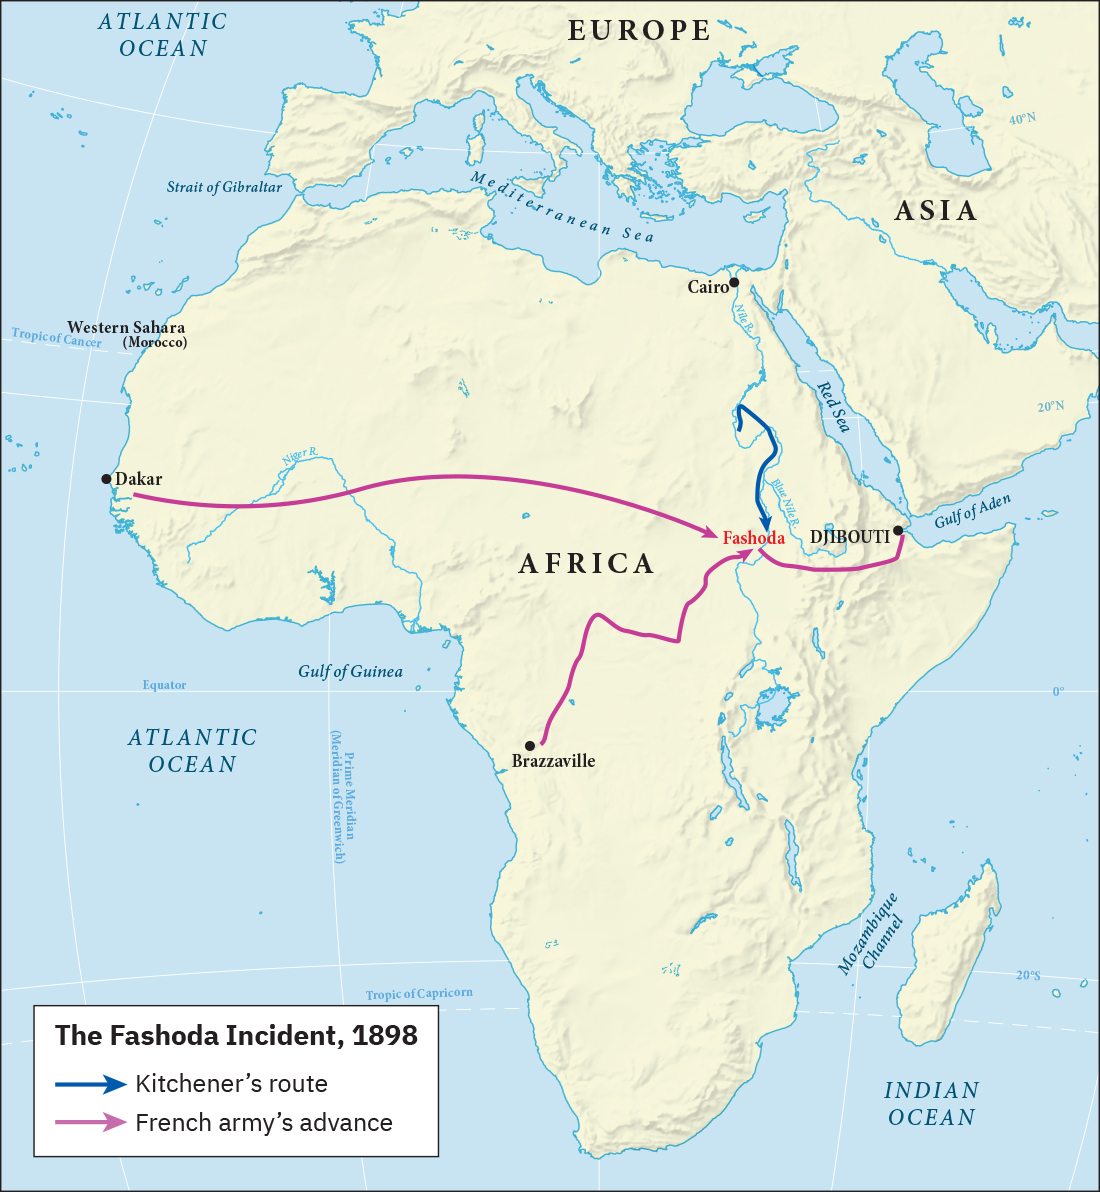 A map of Africa is shown. The map is labeled “The Fashoda Incident, 1898.” A blue arrowed indicating “Kitchener’s route” extends from a point along the Nile River south of Cairo, heads north for a small bit then heads south to the city of Fashoda. A purple arrow, indicating “French army’s advance” runs from the city of Dakar on the west coast of Africa, eastward across the continent to the city of Fashoda. Another purple arrow runs from the southwestern city of Brazzaville northeast to the city of Fashoda. A purple line runs between the cities of Fashoda and Djibouti on the Gulf of Aden.